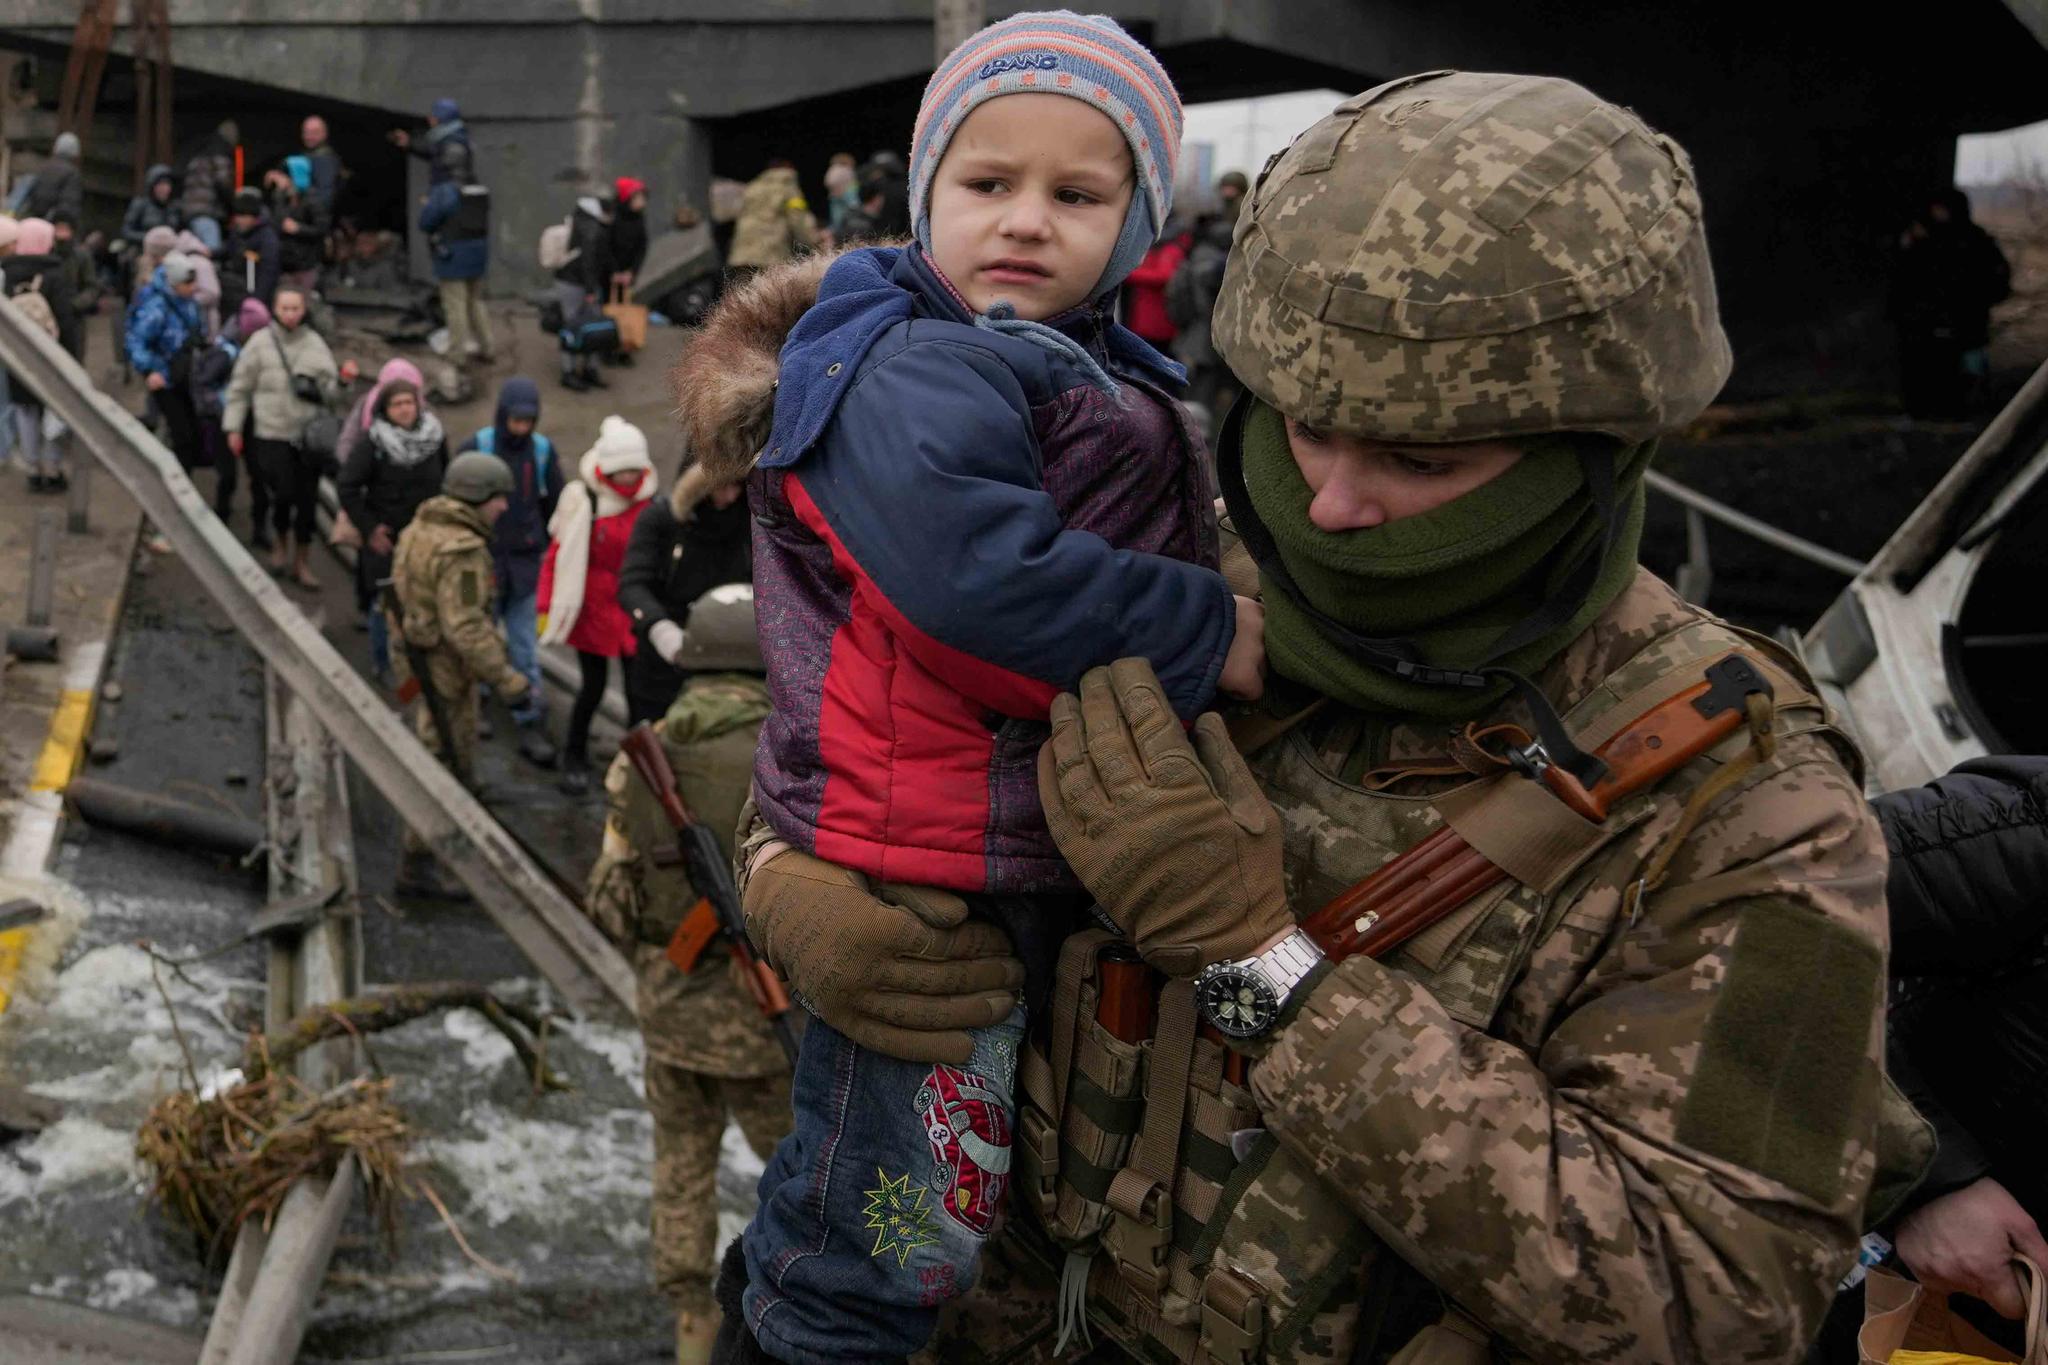 A Ukrainian serviceman holds a baby crossing the Irpin river on an improvised path under a bridge that was destroyed by a Russian airstrike, while assisting people fleeing the town of Irpin, Ukraine, Saturday, March 5, 2022.